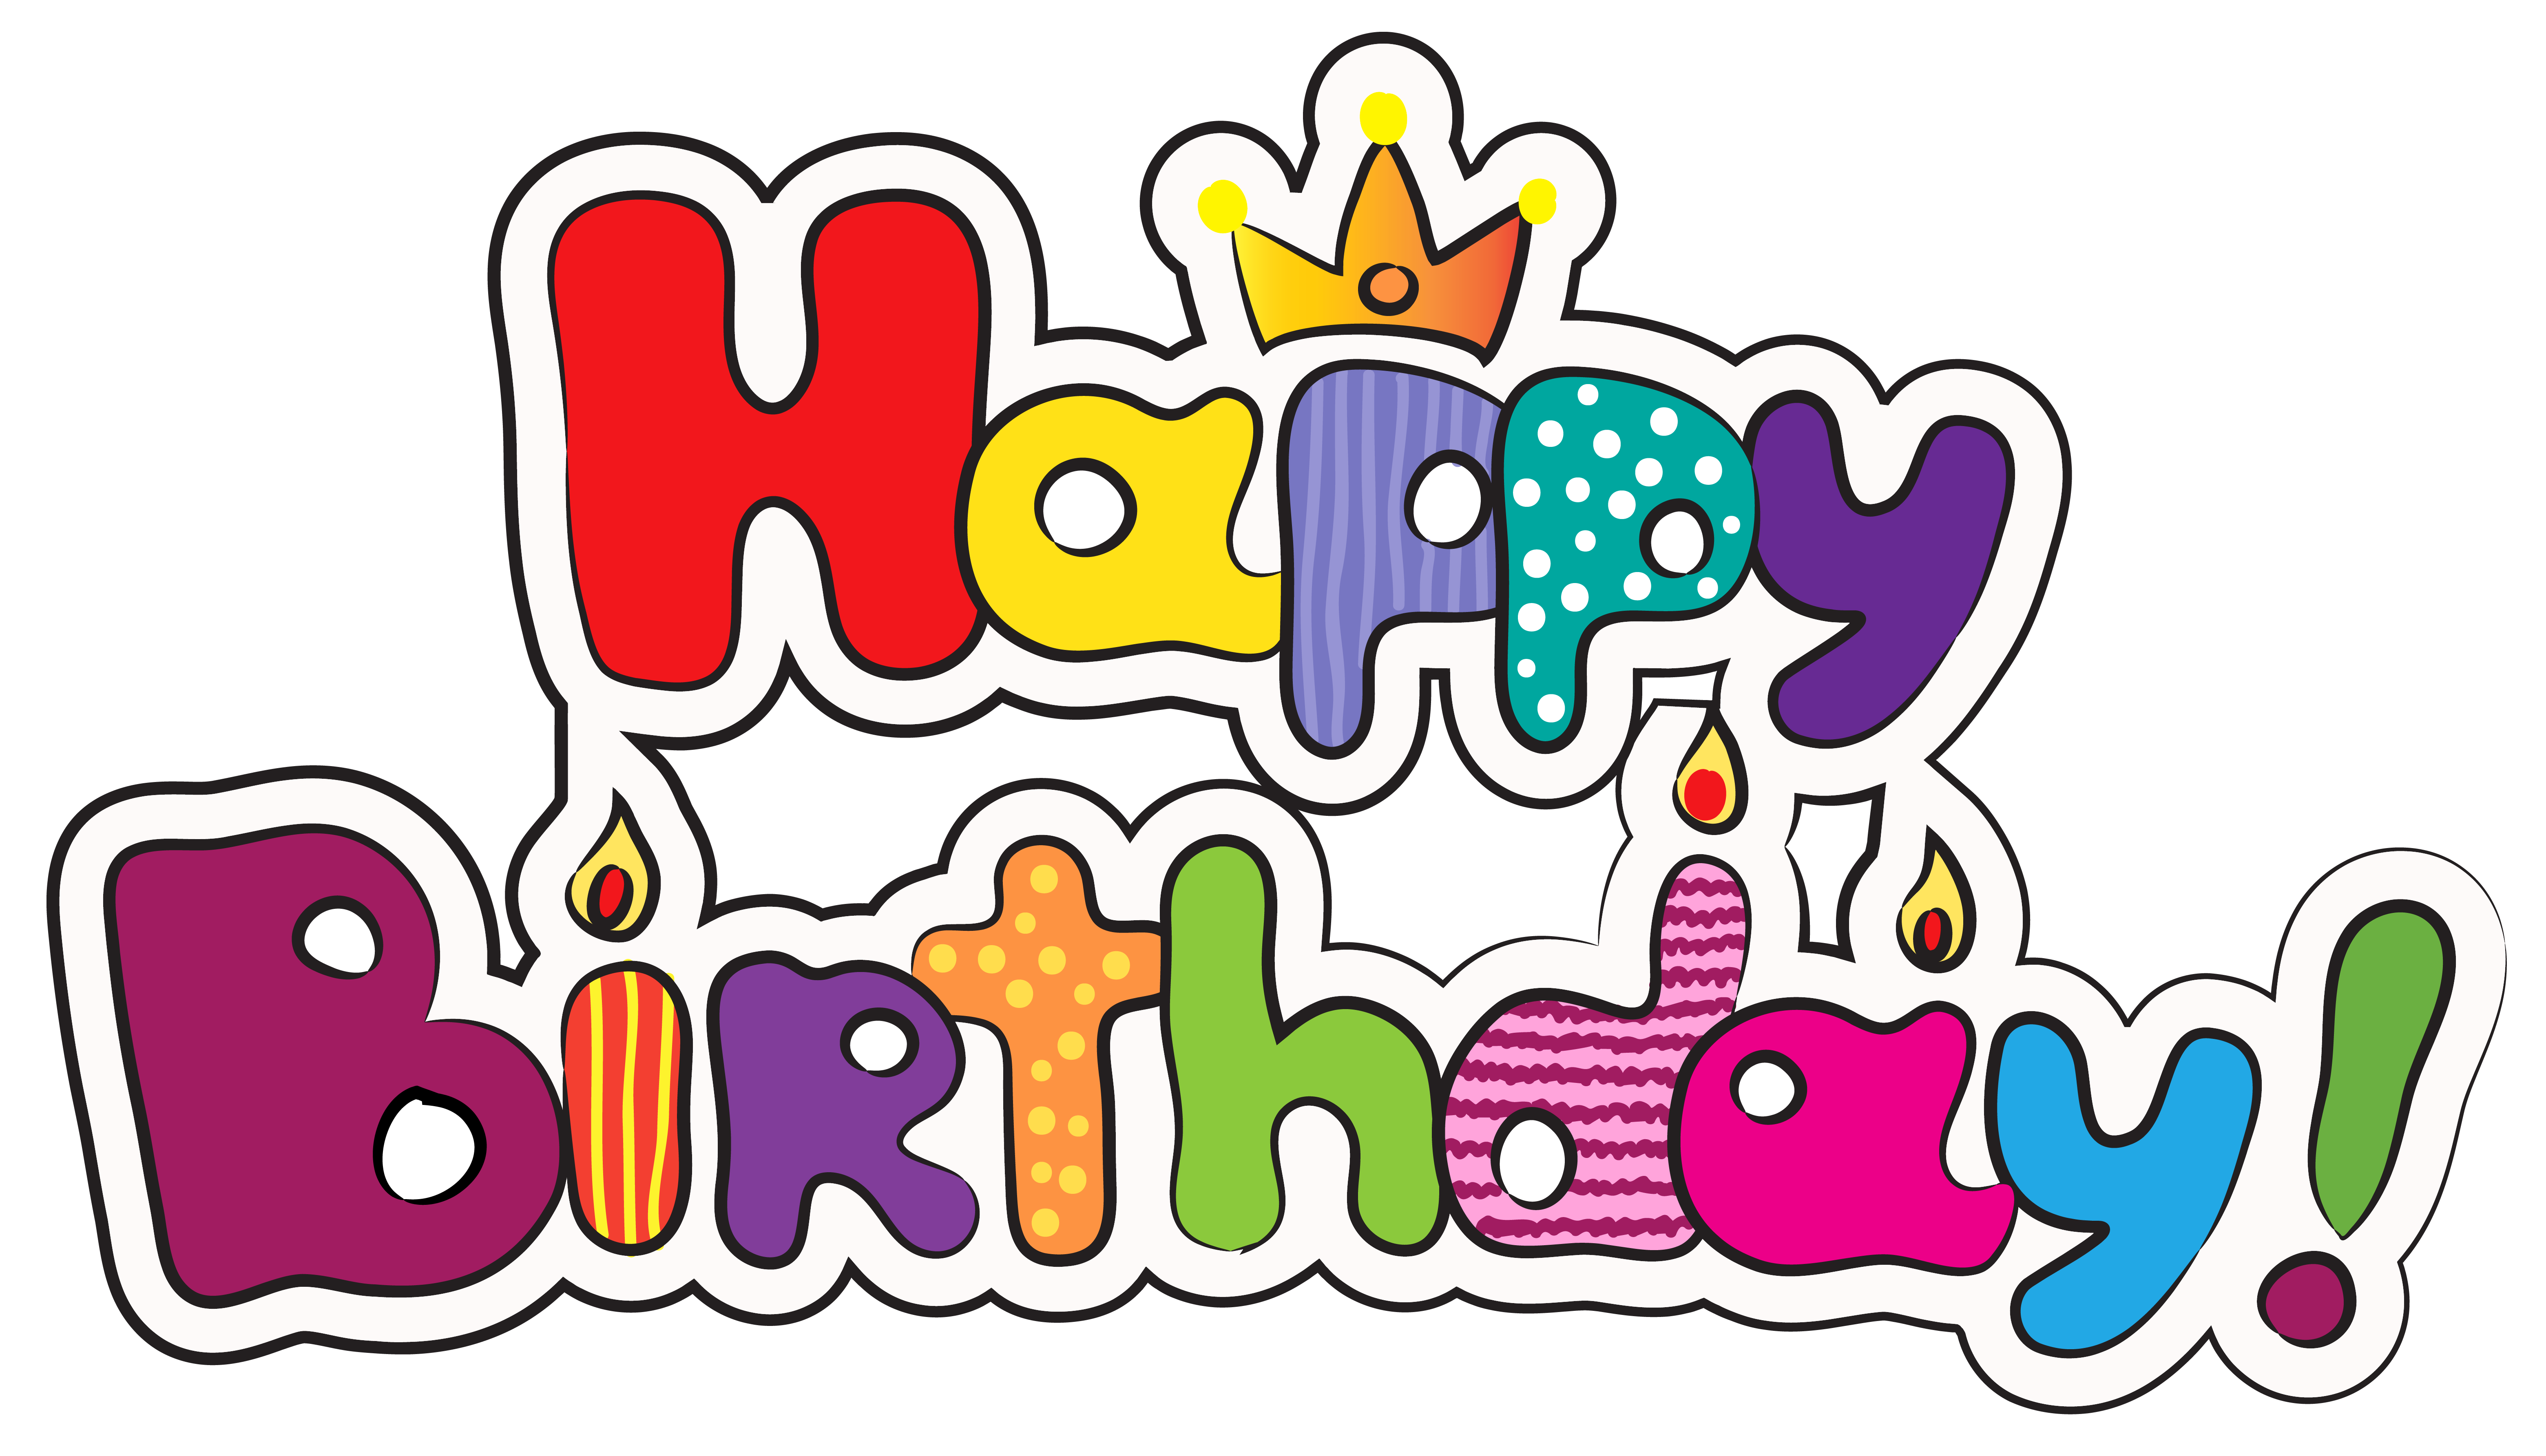 Happy Birthday PNG Clipart Pi